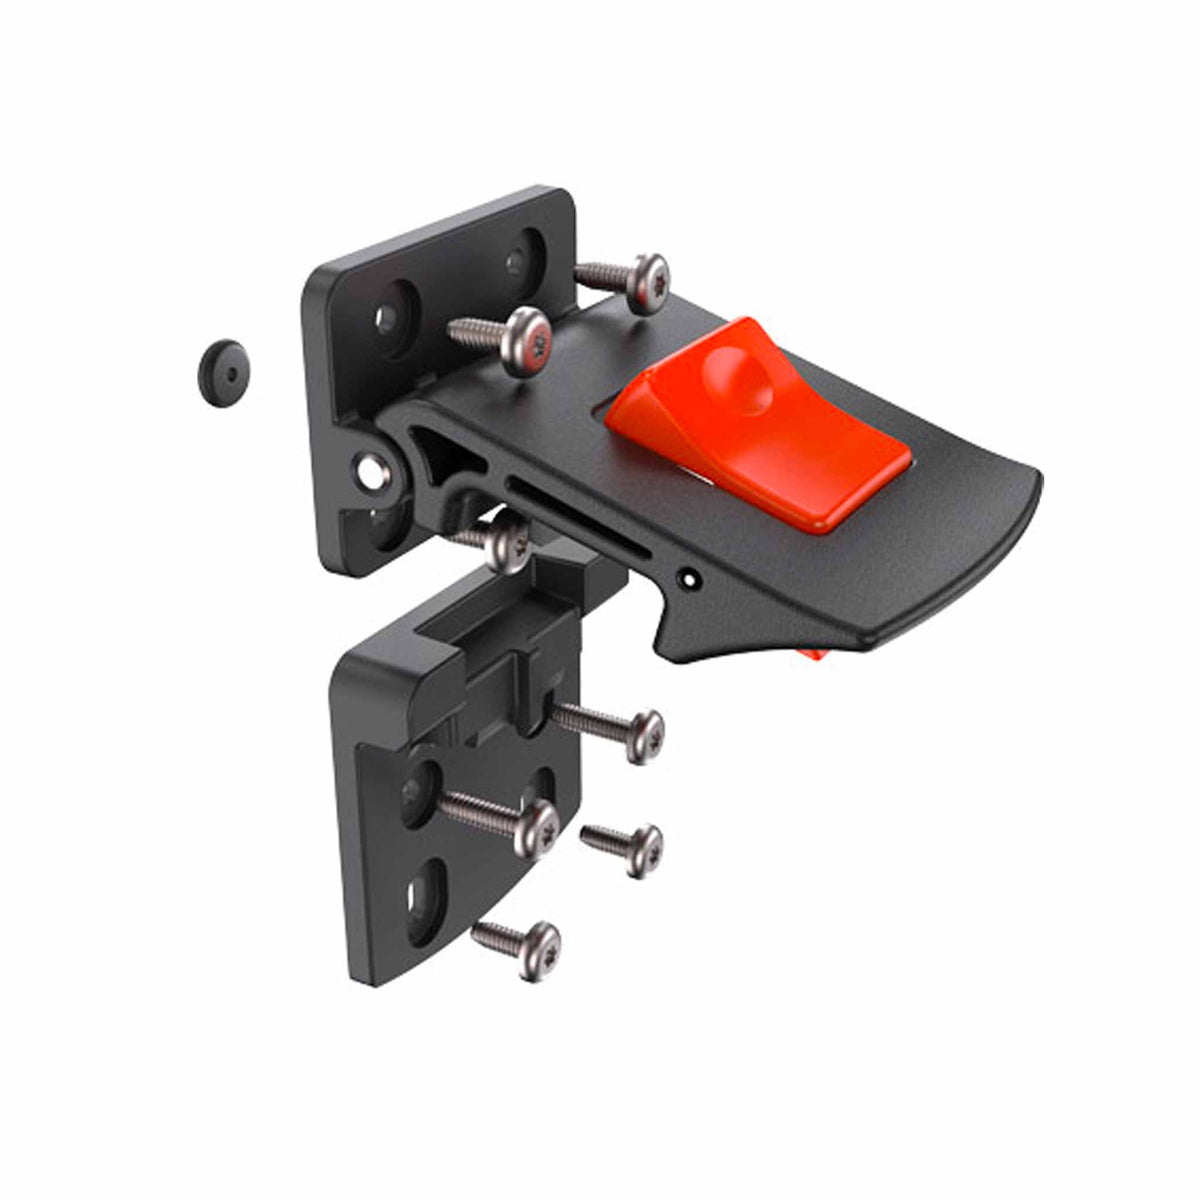 Replacement Roto Screw Latch with orange button